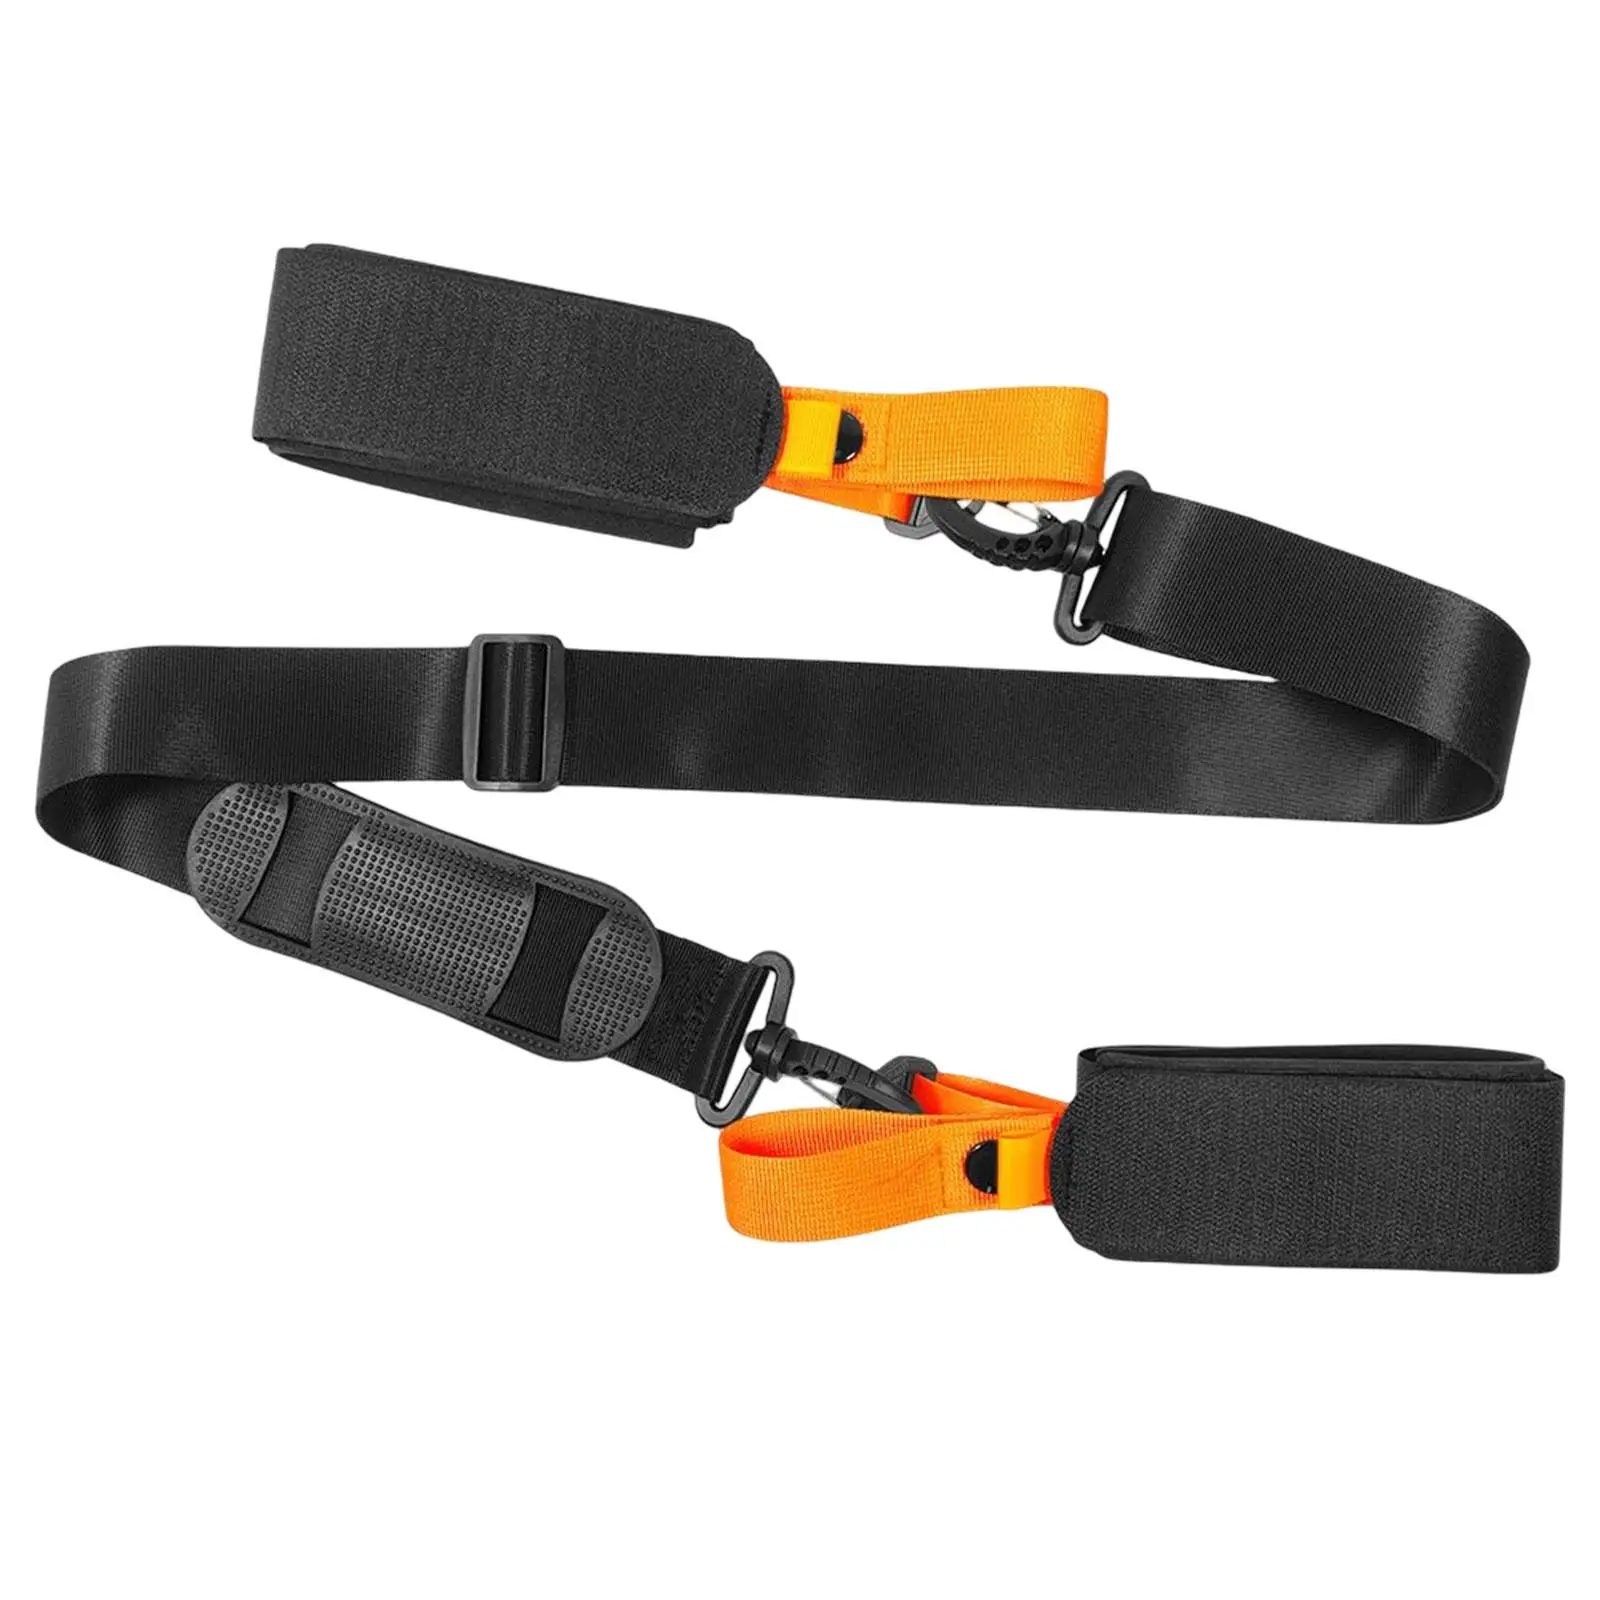 Ski Carry Strap Belt Gear Snowboard Straps for Ski Downhill Skiing Adults